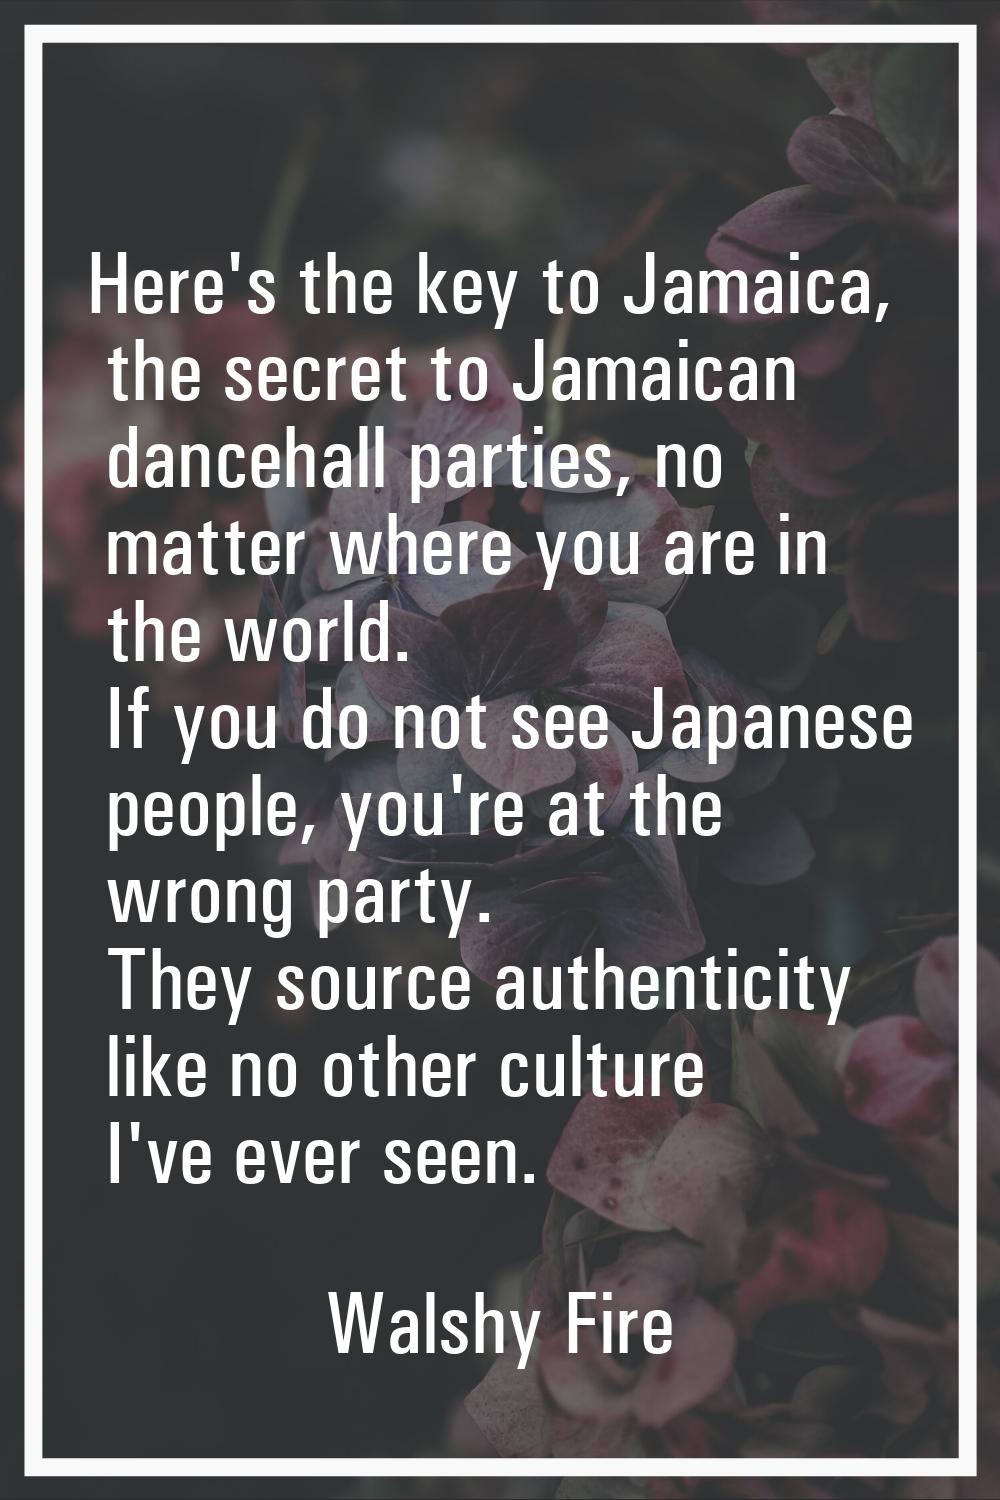 Here's the key to Jamaica, the secret to Jamaican dancehall parties, no matter where you are in the